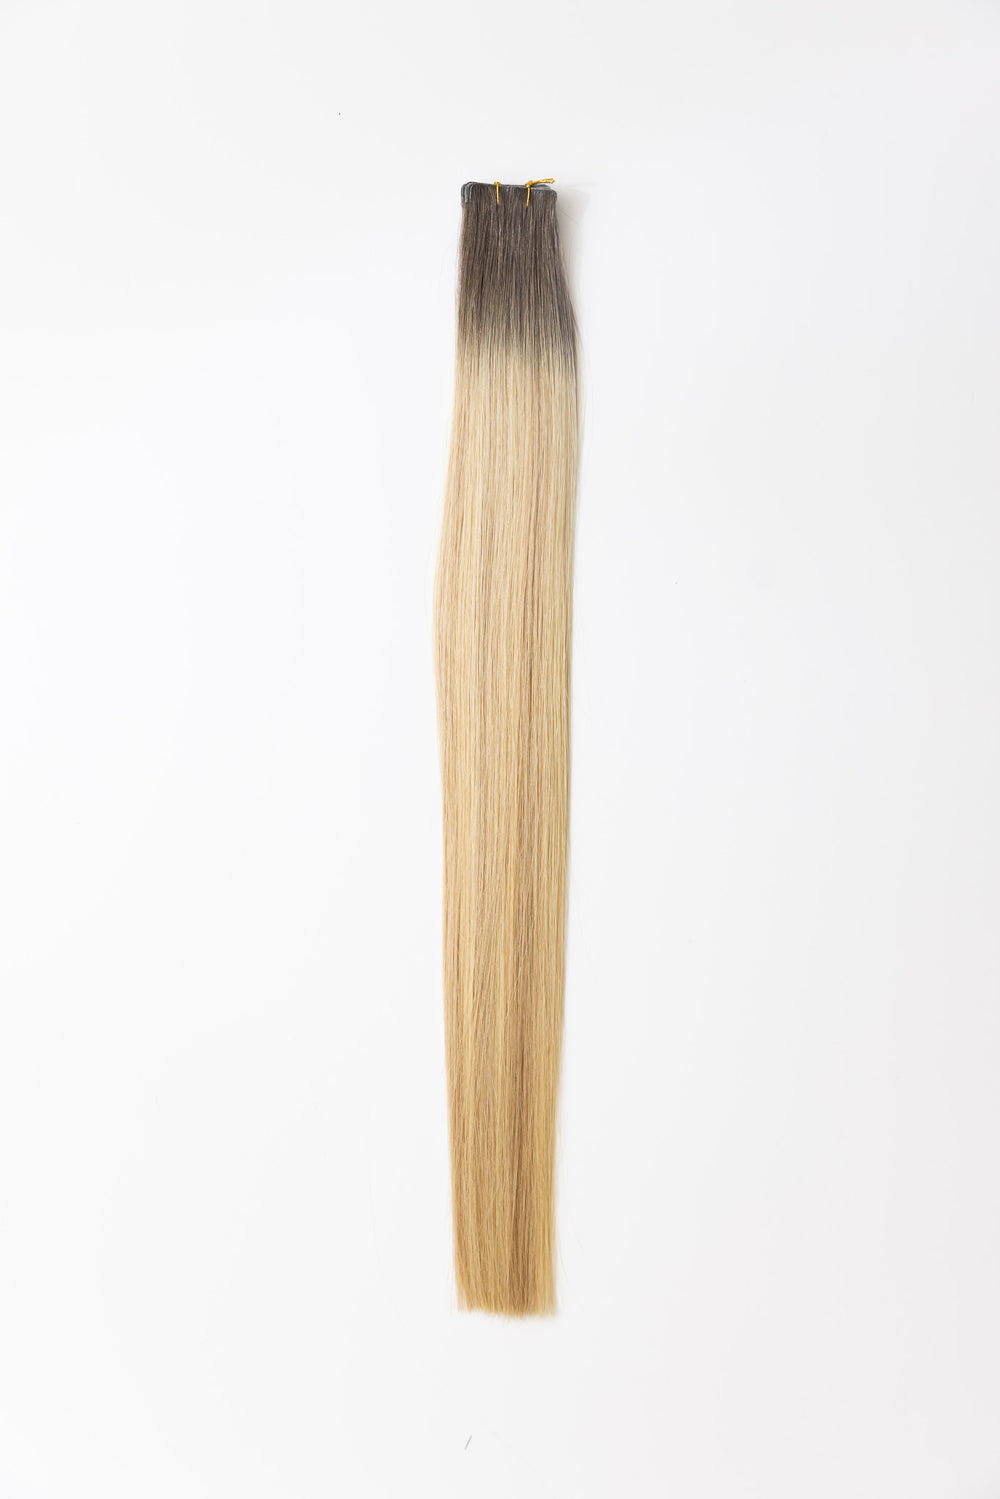 Toasted Coconut Undetectable Tape Ins-Christian Michael Hair Extensions